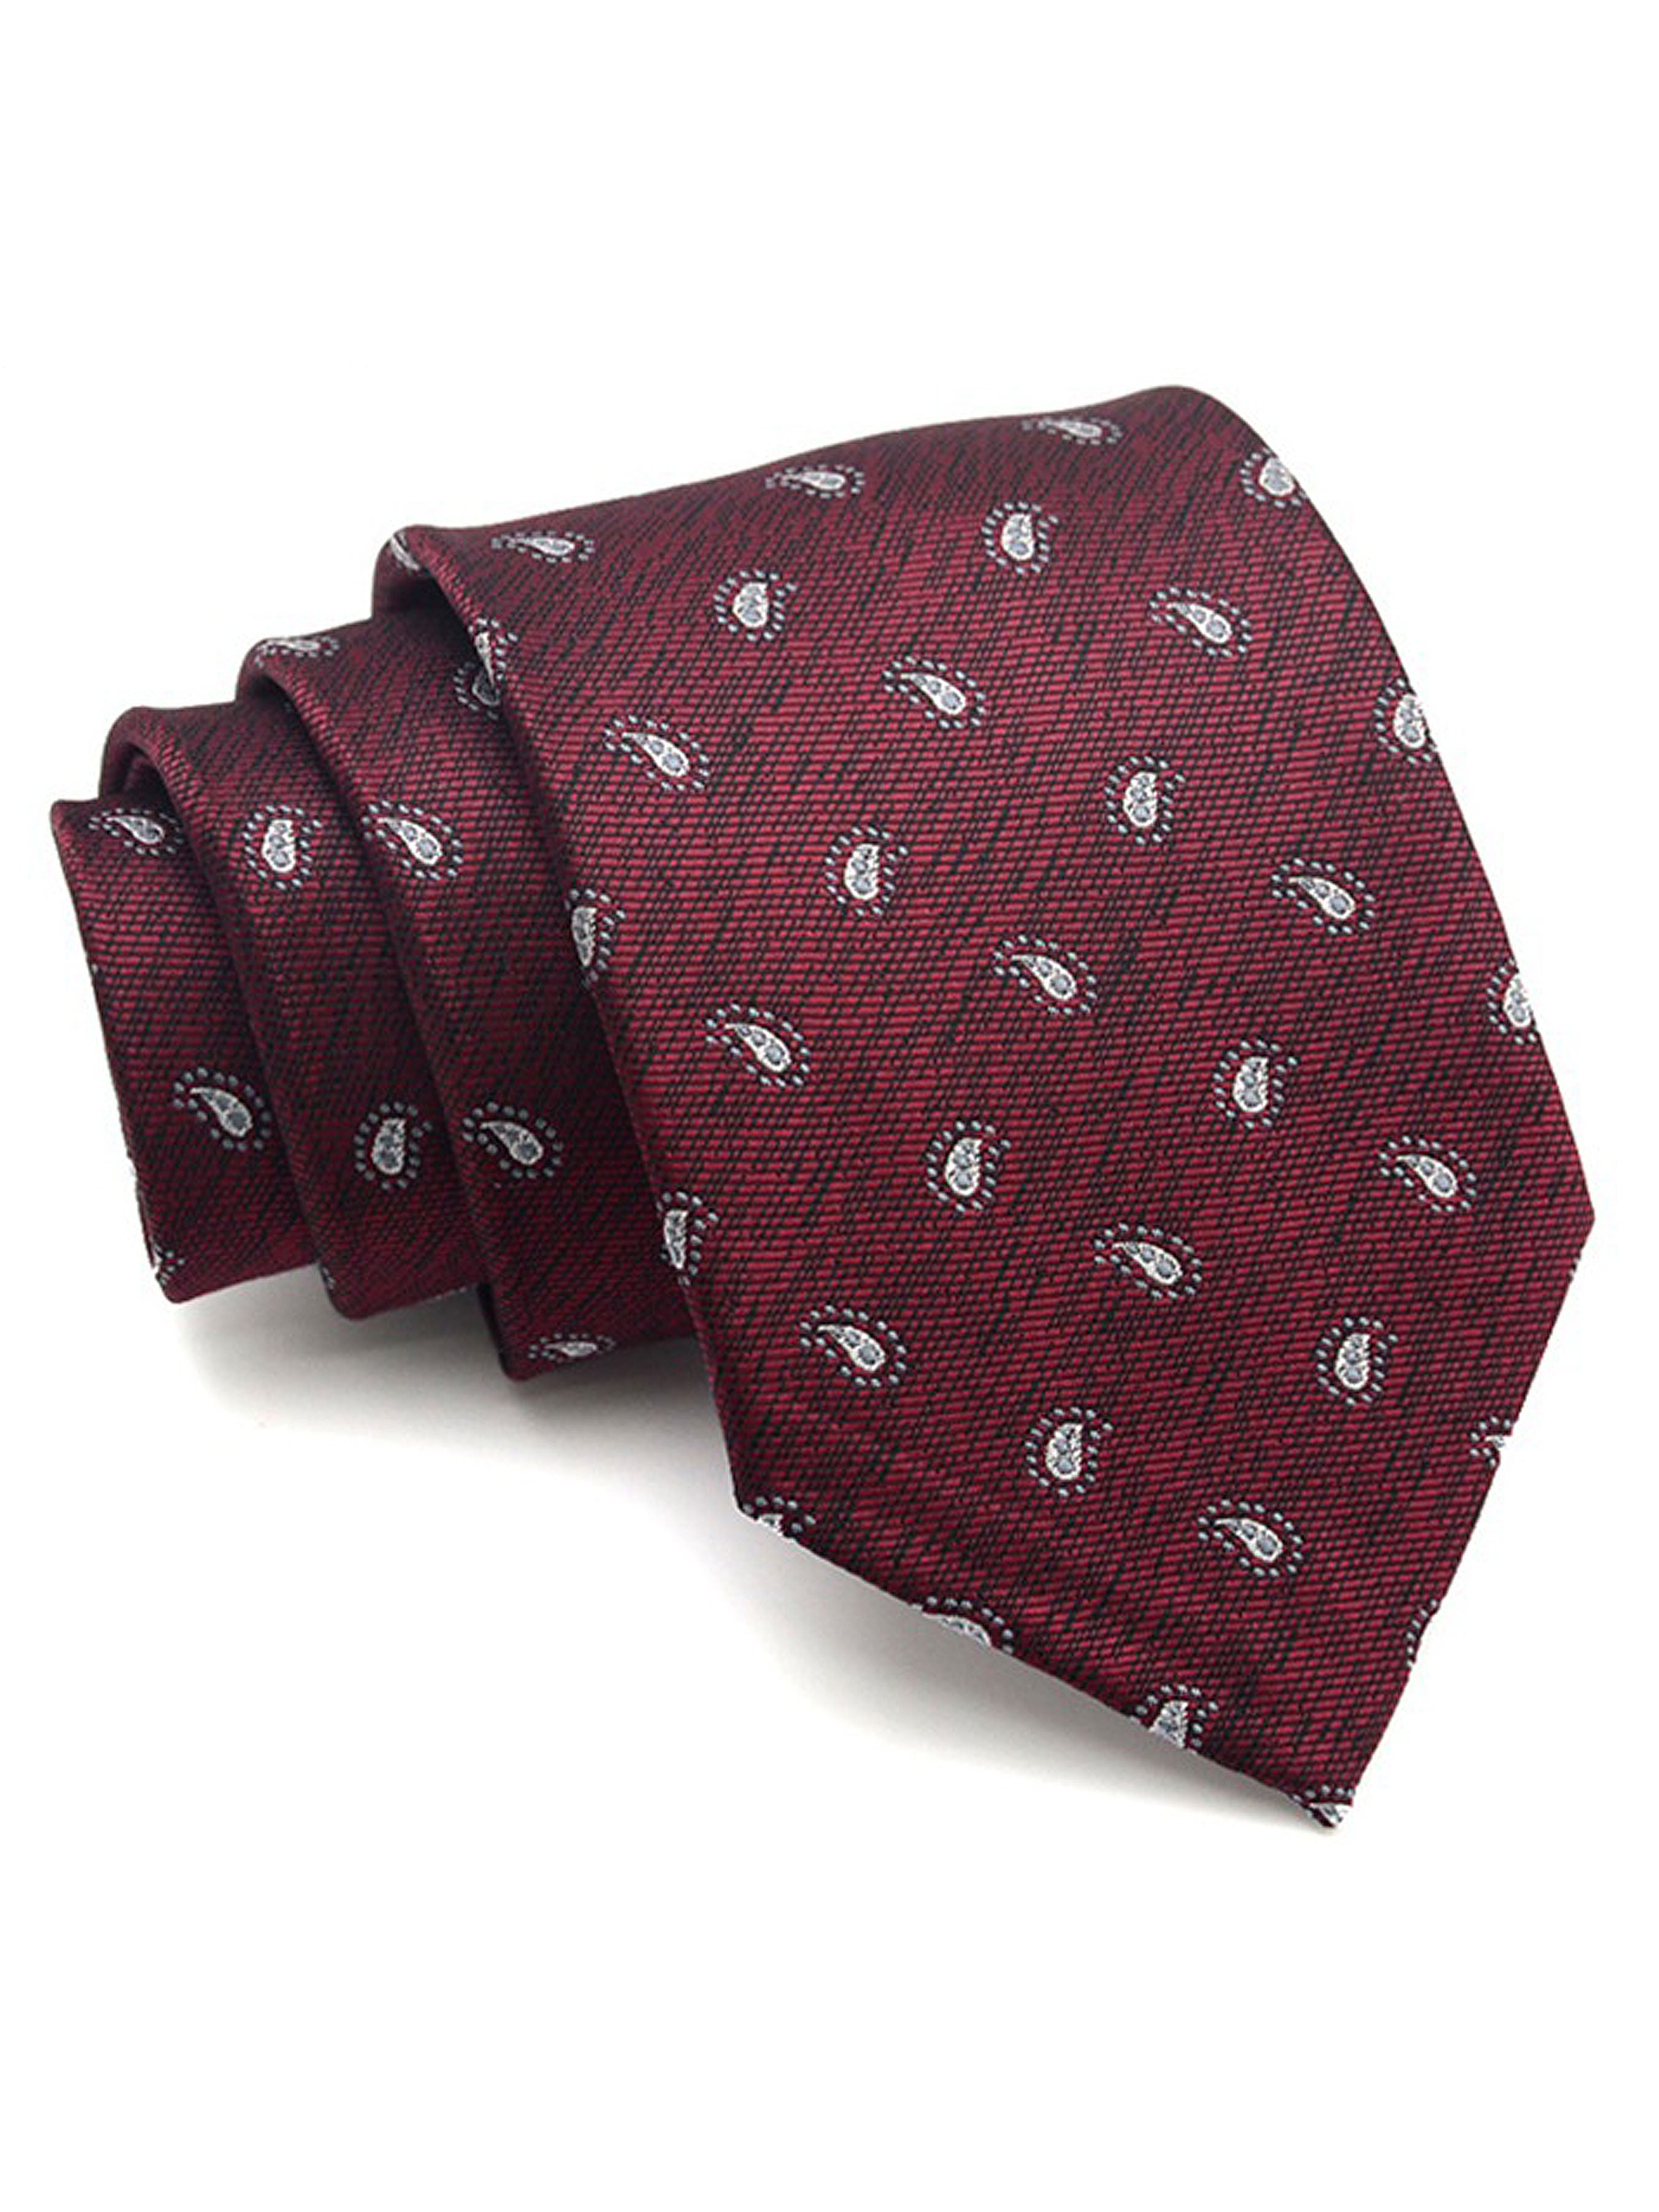 Budding Paisley Tie - Red Burgundy - Zeve Shoes